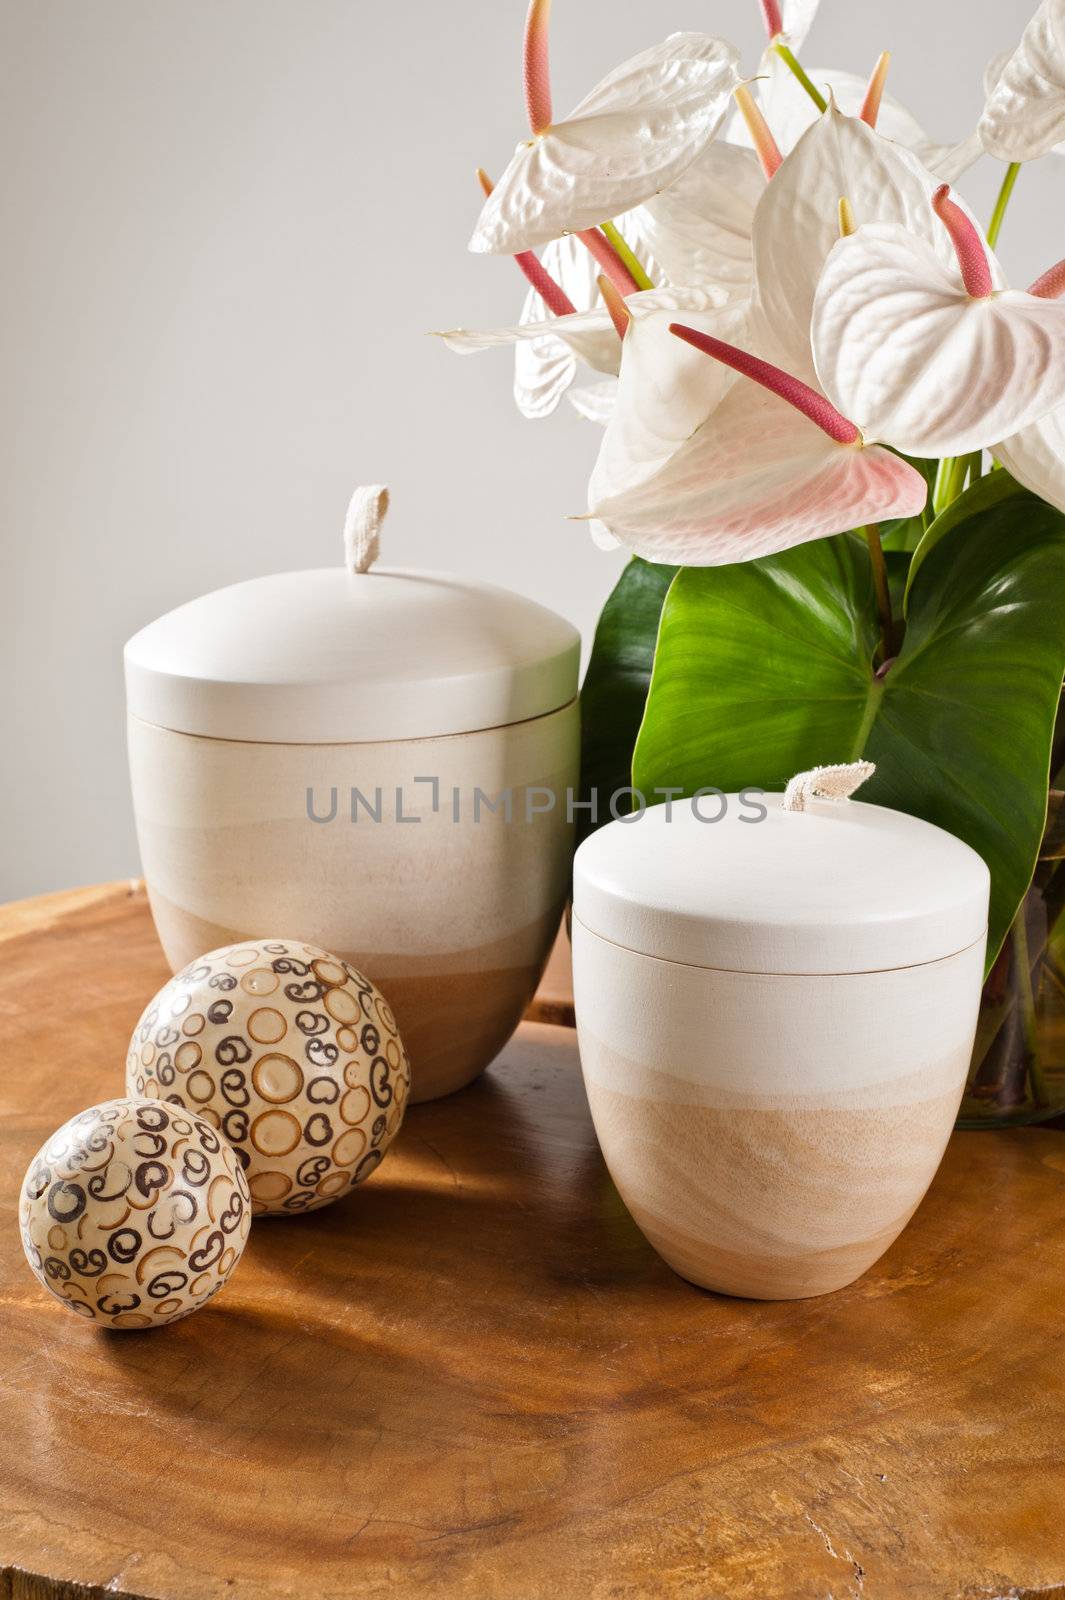 Wooden objects as interior decoration on wooden table